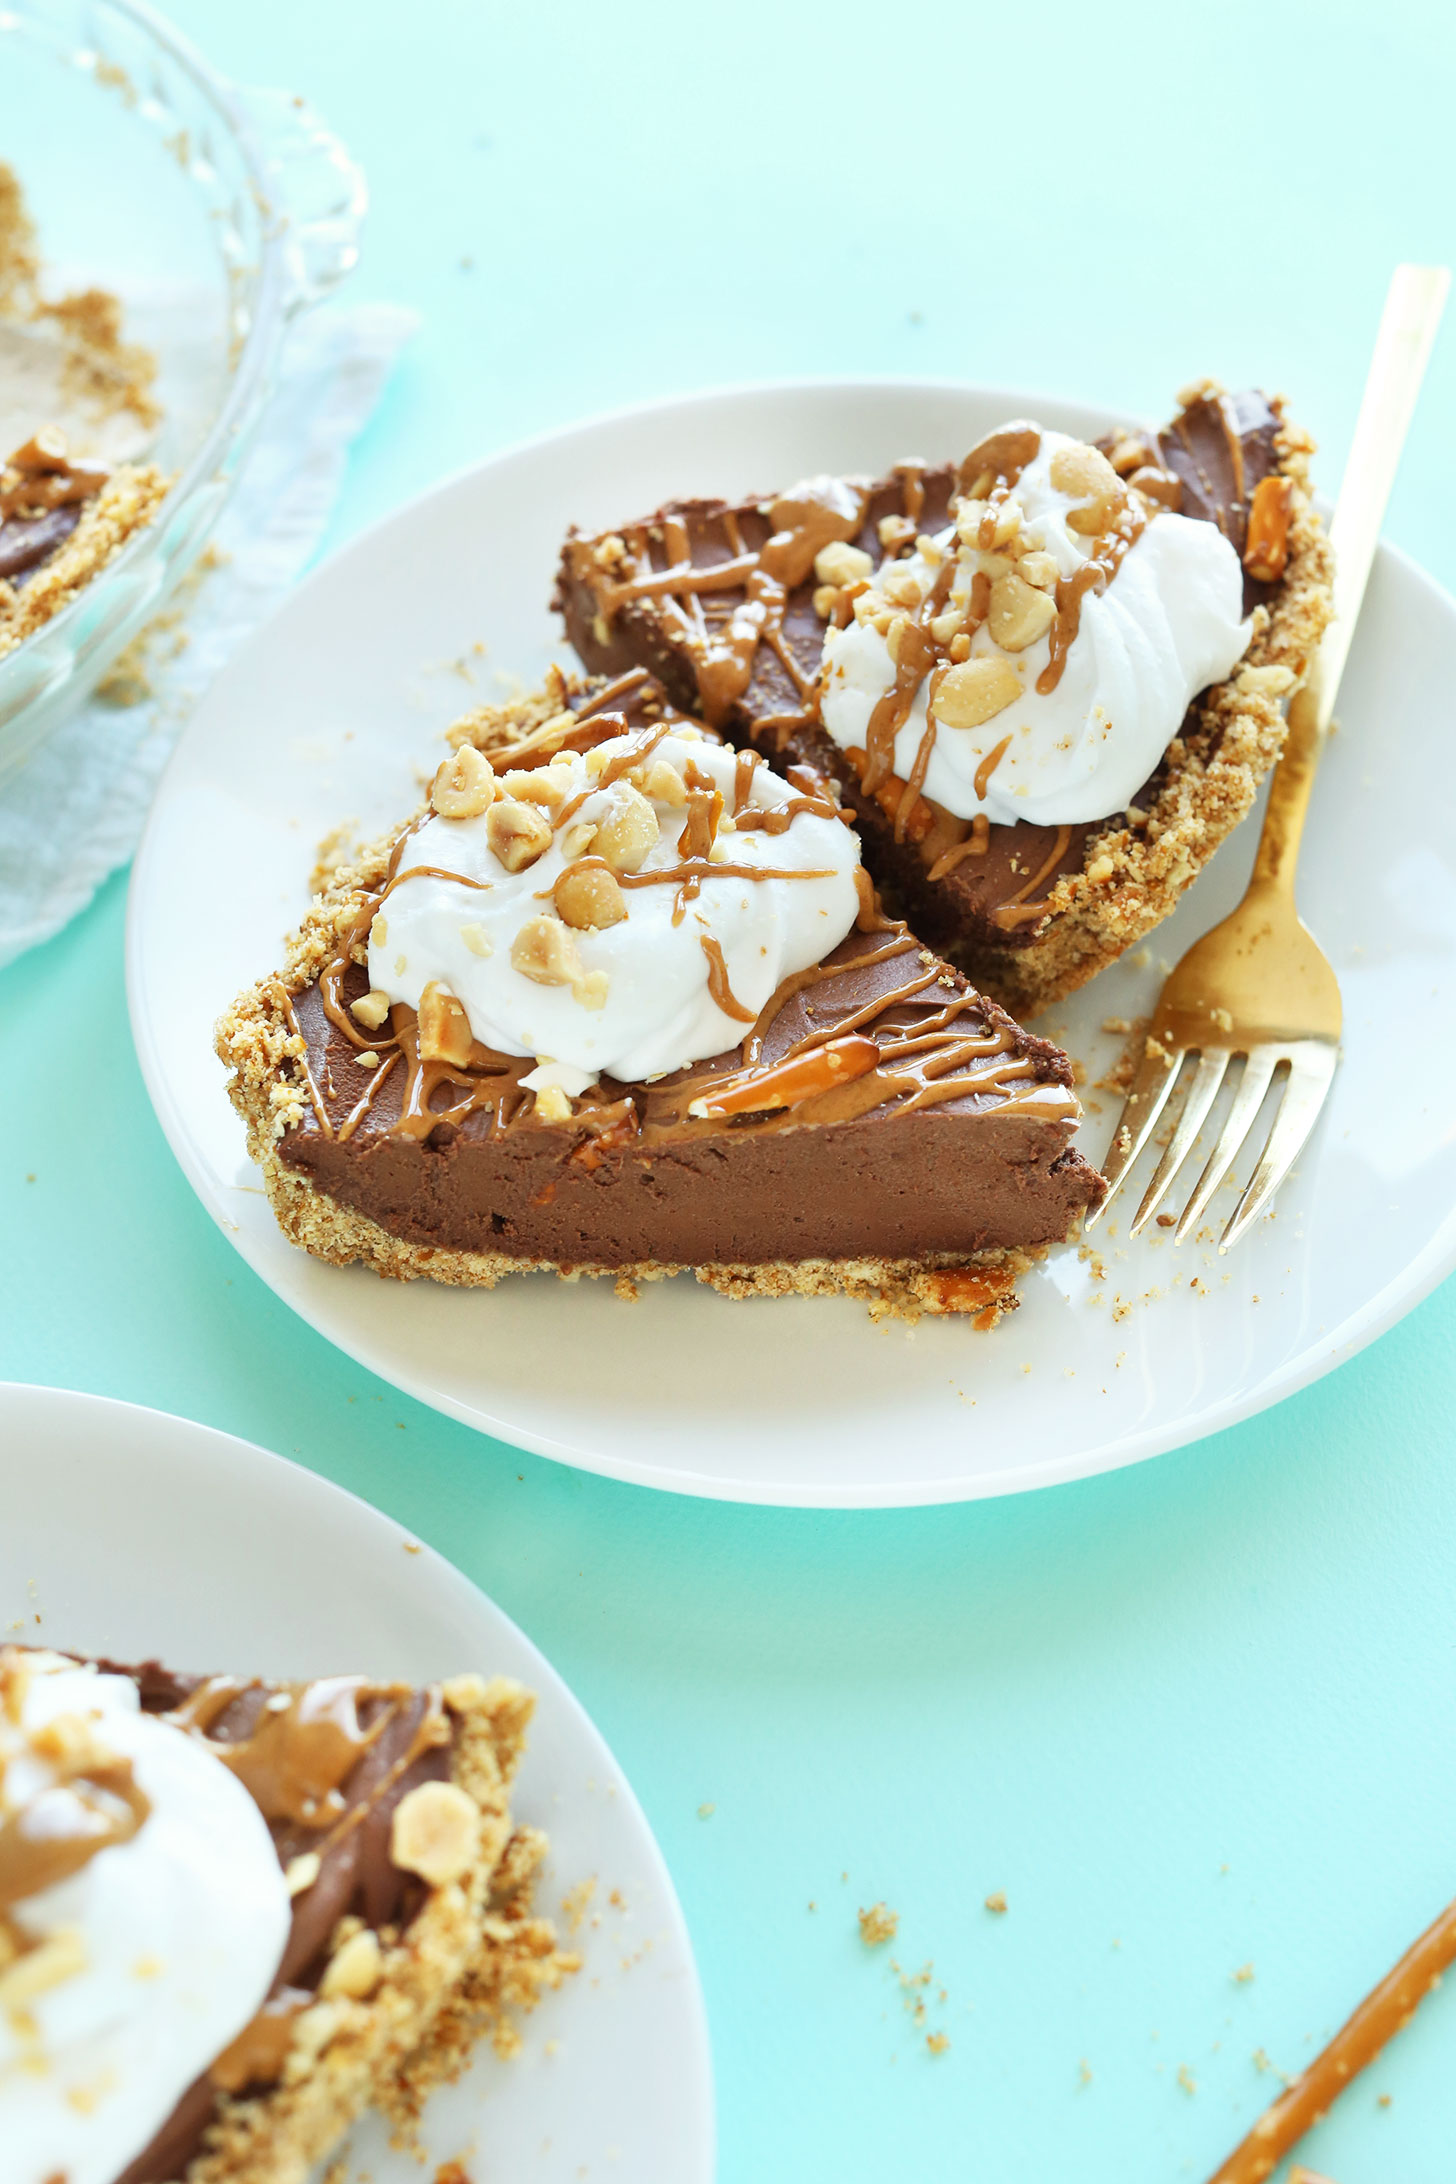 Plate with two slices of our amazing and simple Pretzel Peanut Butter Chocolate Pie